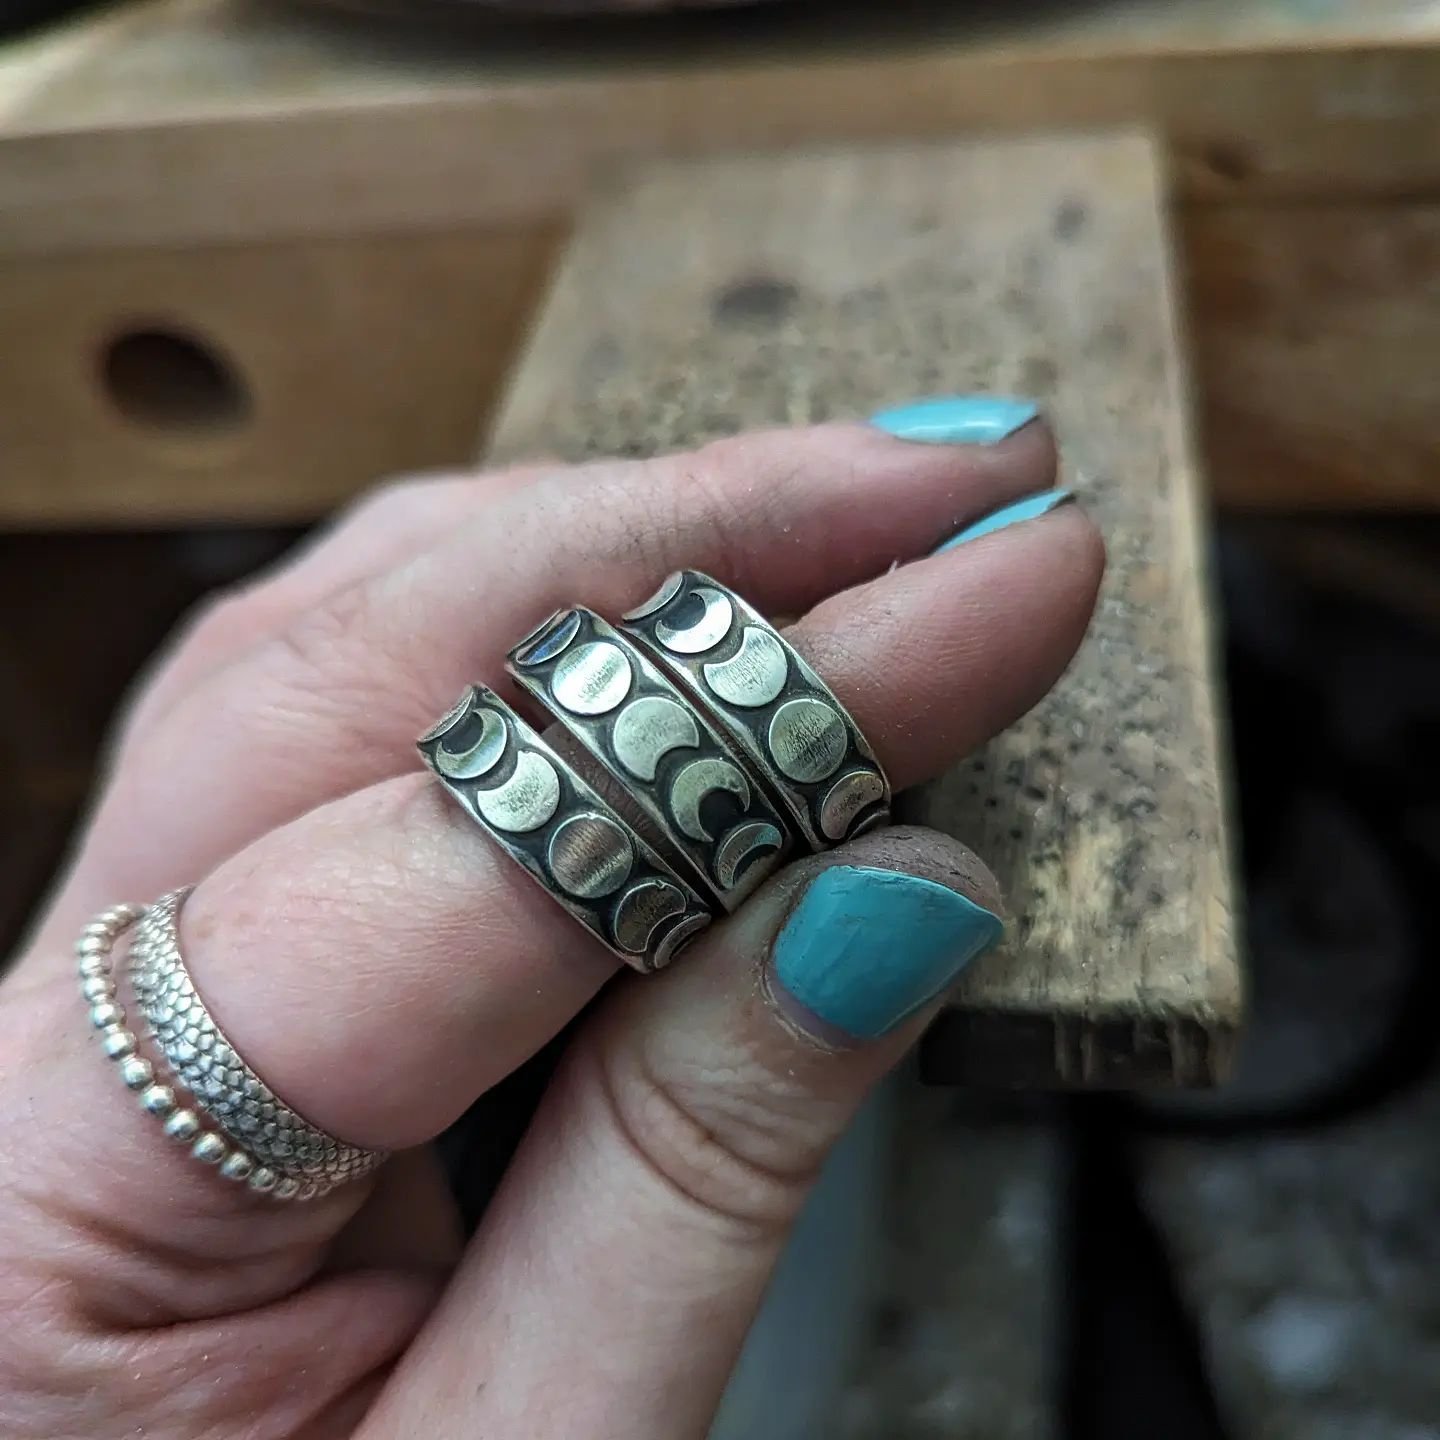 Excuse my polishing fingers, sometimes Smithing gets messy! The Moon Phase Band Rings have been flying out the door, I only have 3 left until I get a new supply shipment in, size 7, 8, and 9! Snag yours this Saturday at @bcbrewerymd at the Spring Ven